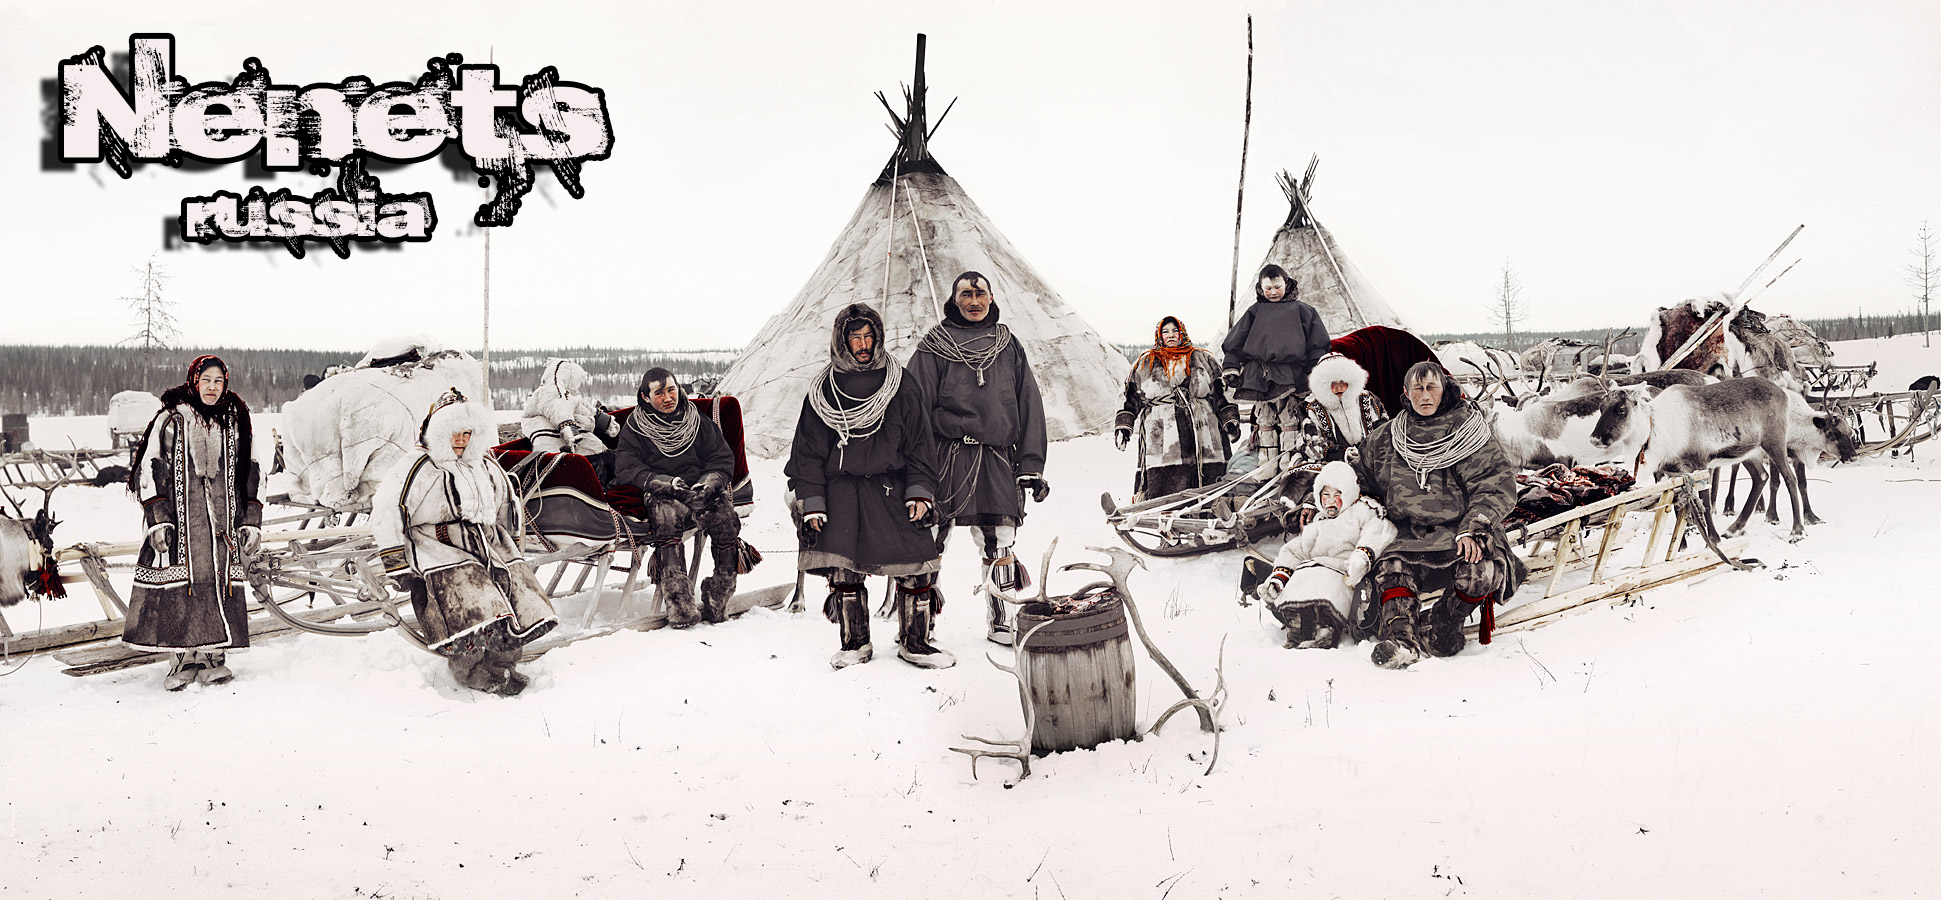 63 Photos of some of the Worlds Most Remote Tribes.